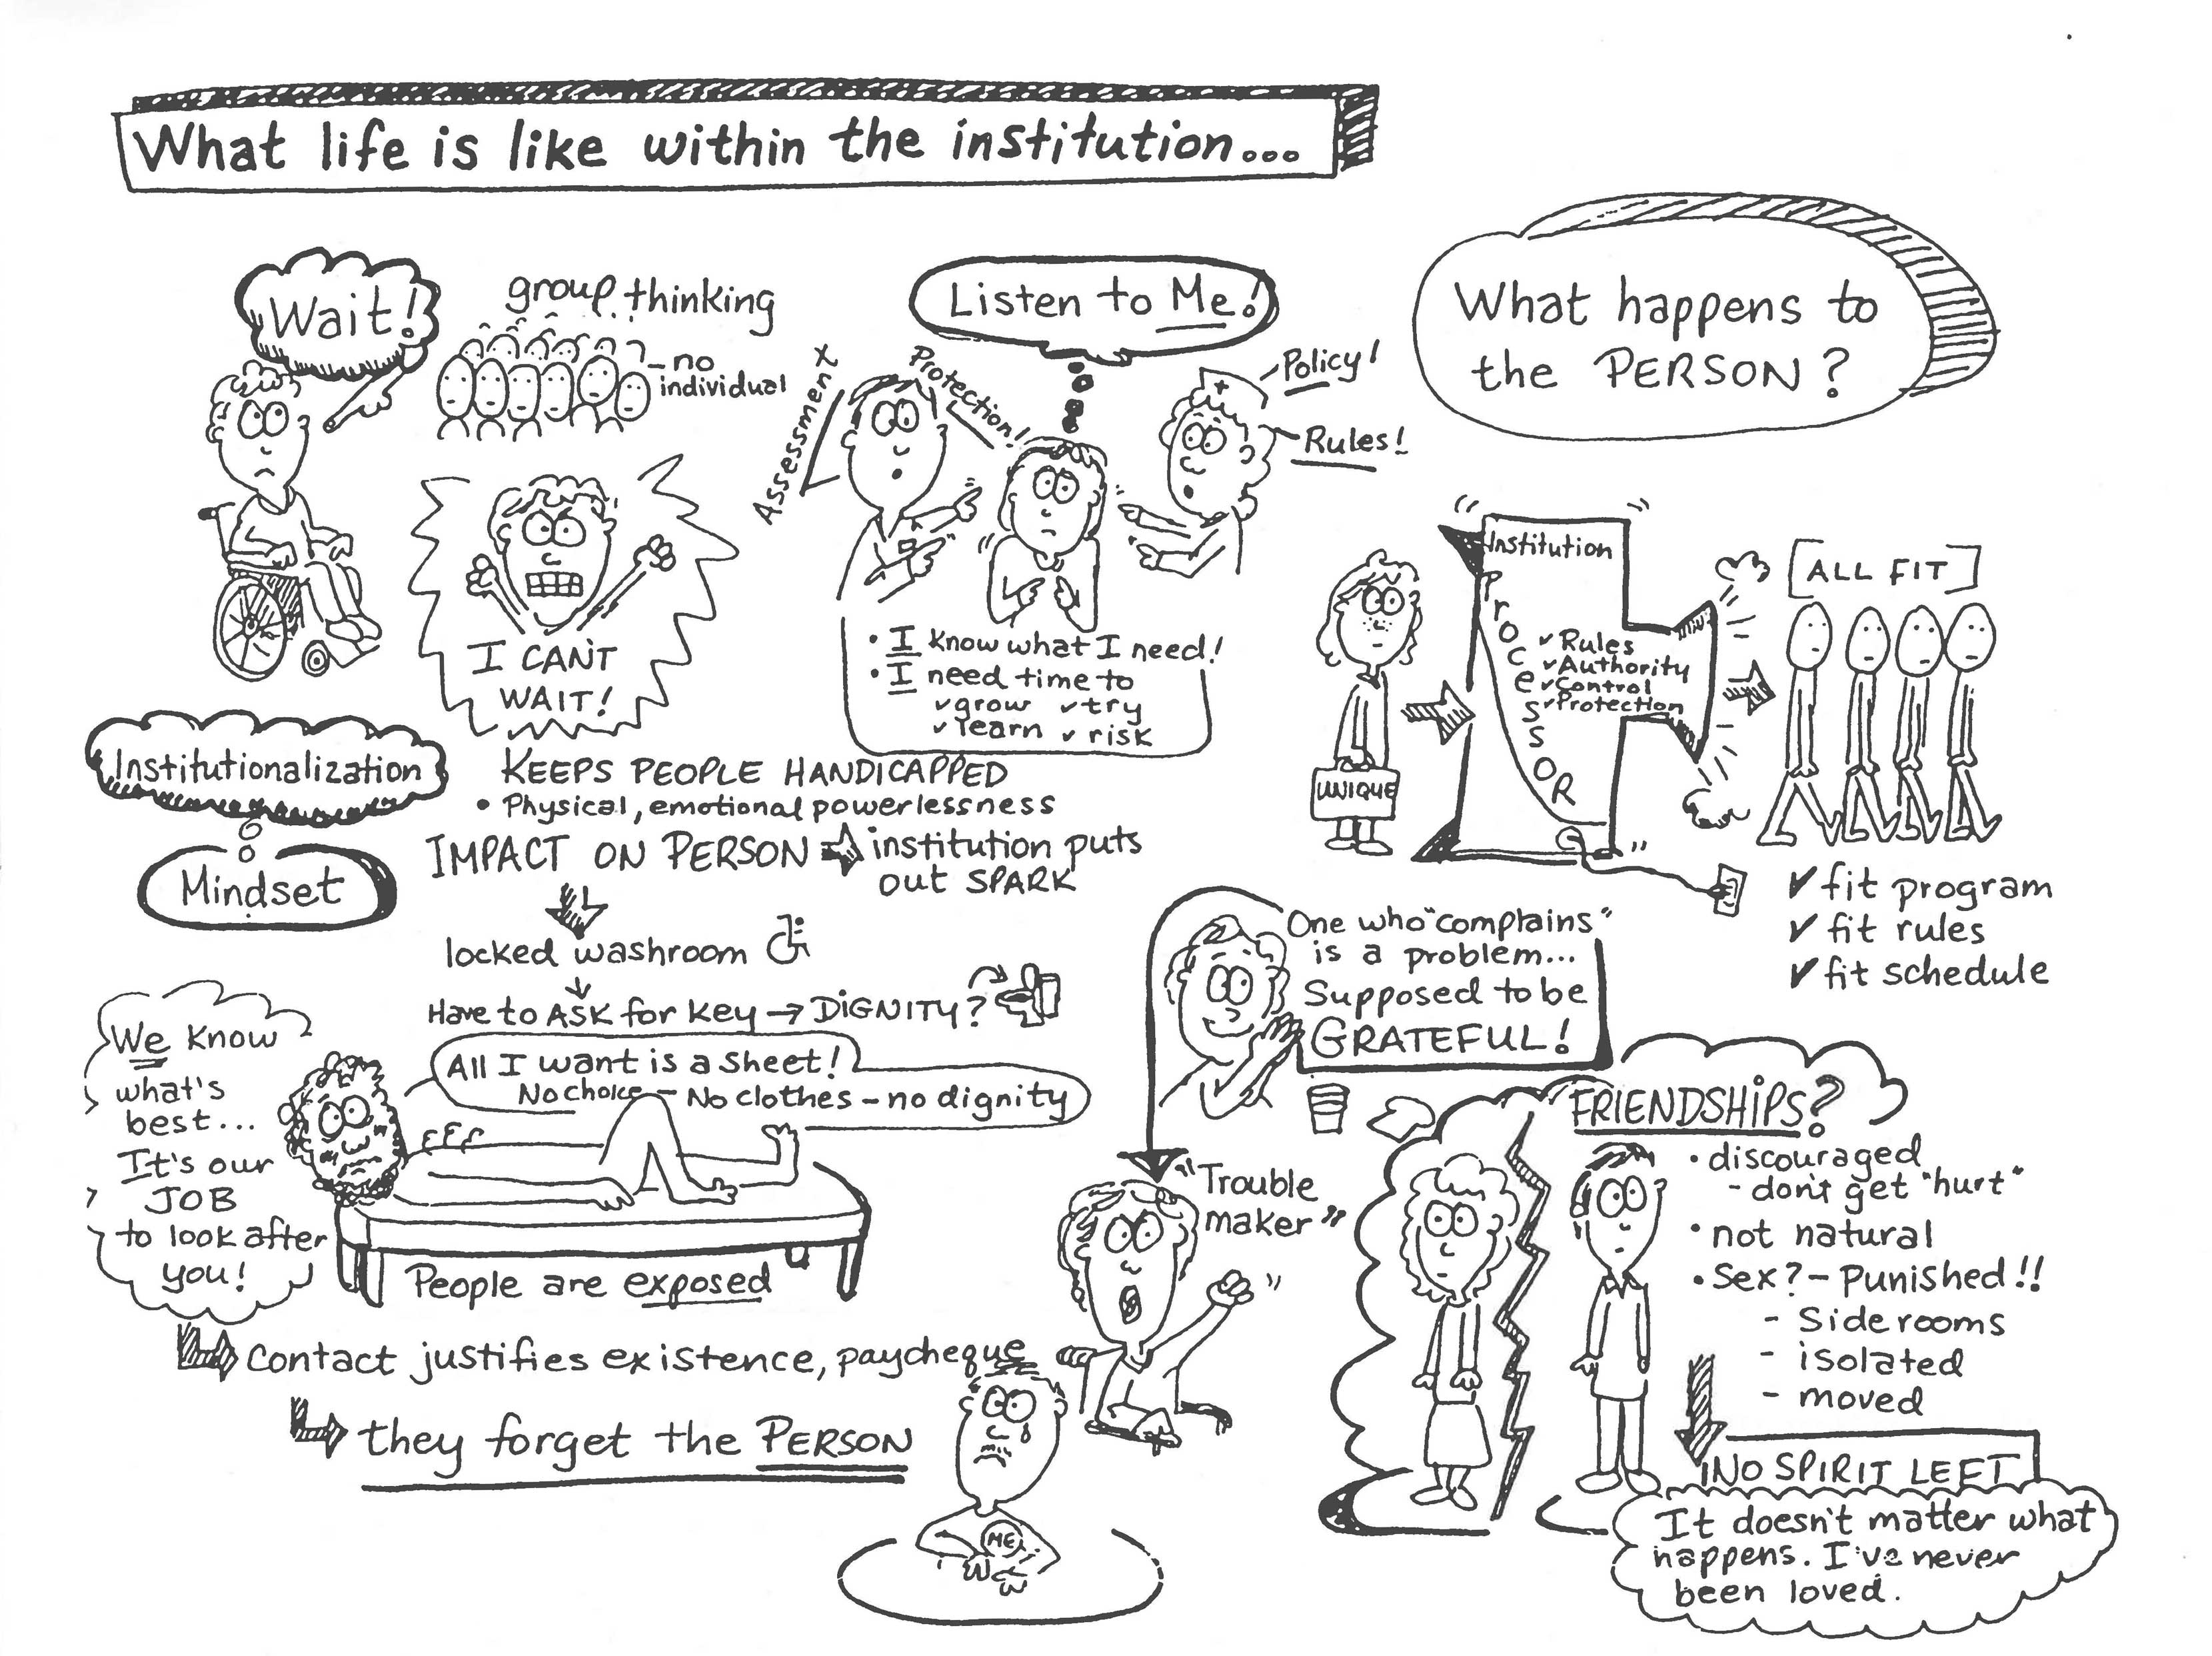 An illustration with title text, “What life is like within the institution.” The illustration shows many different experiences of life in the institution.